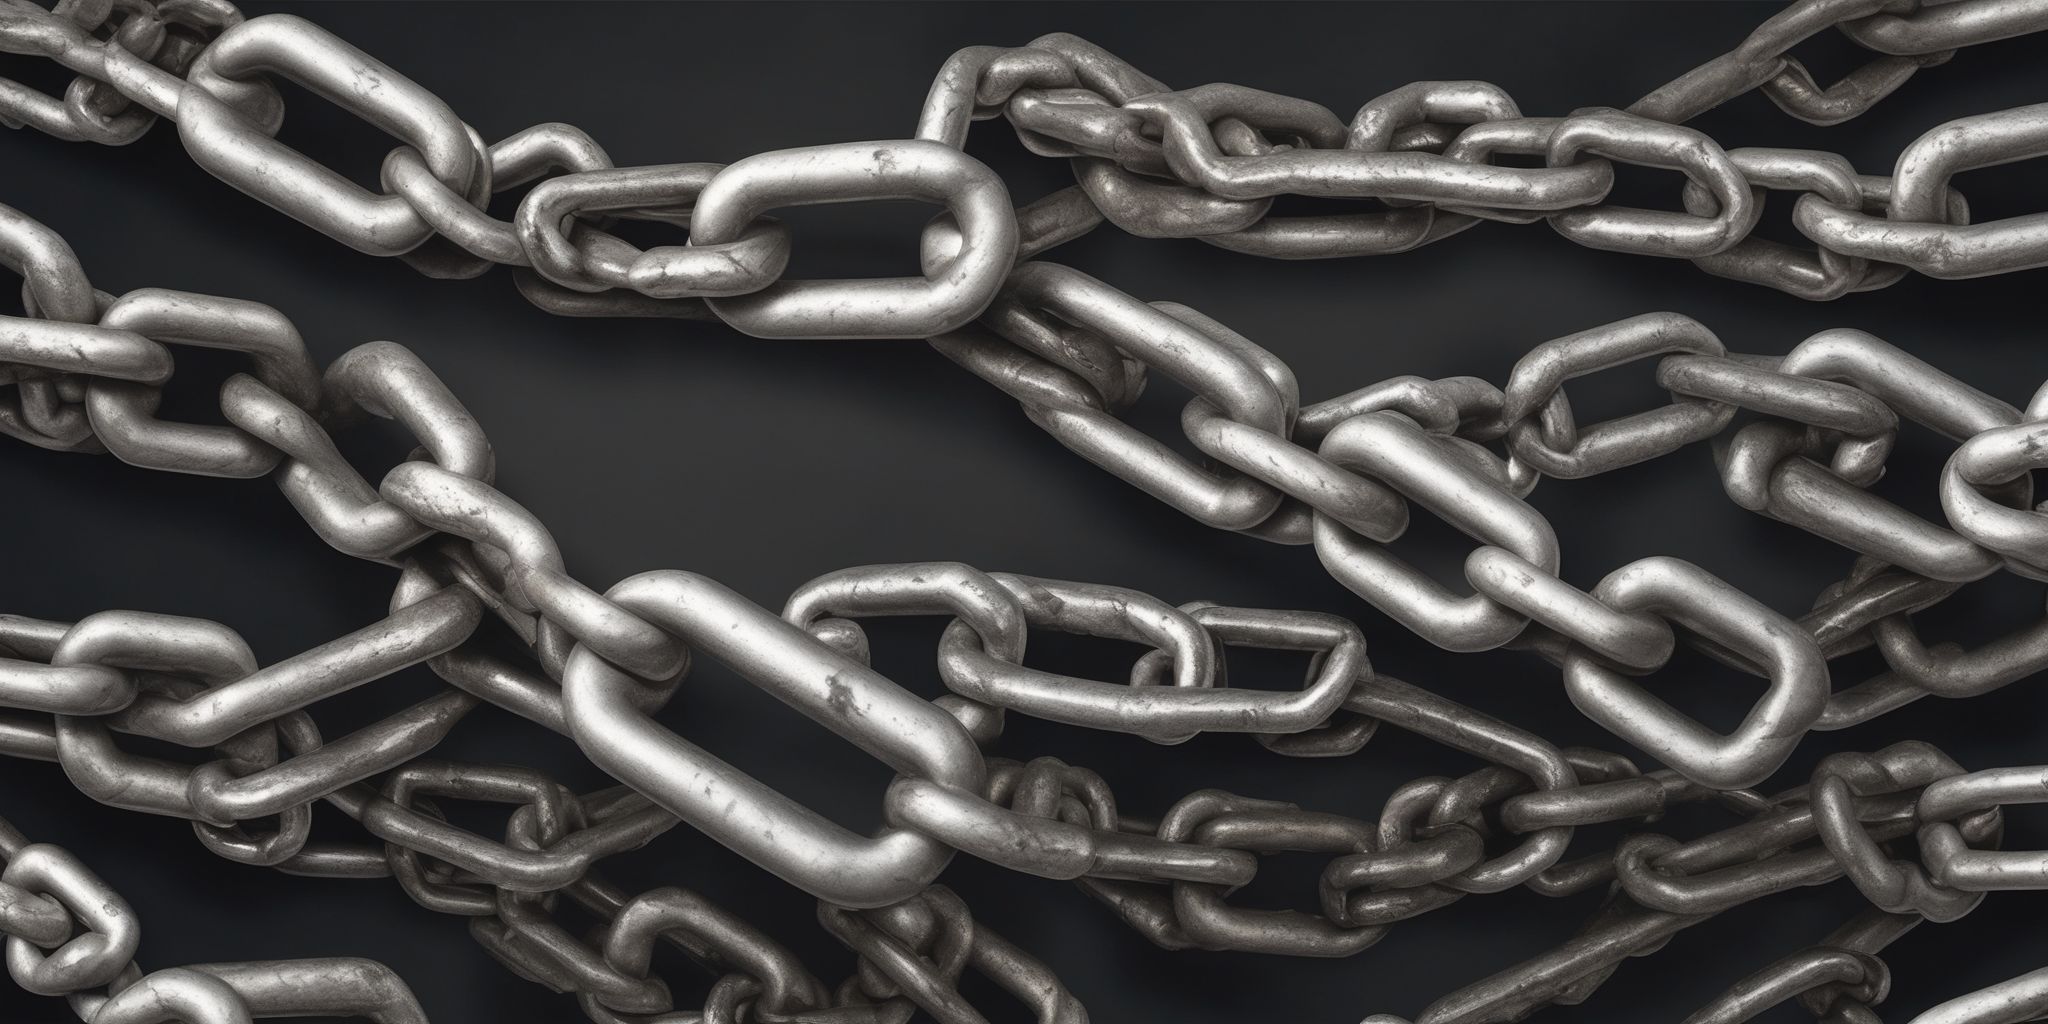 Chains  in realistic, photographic style